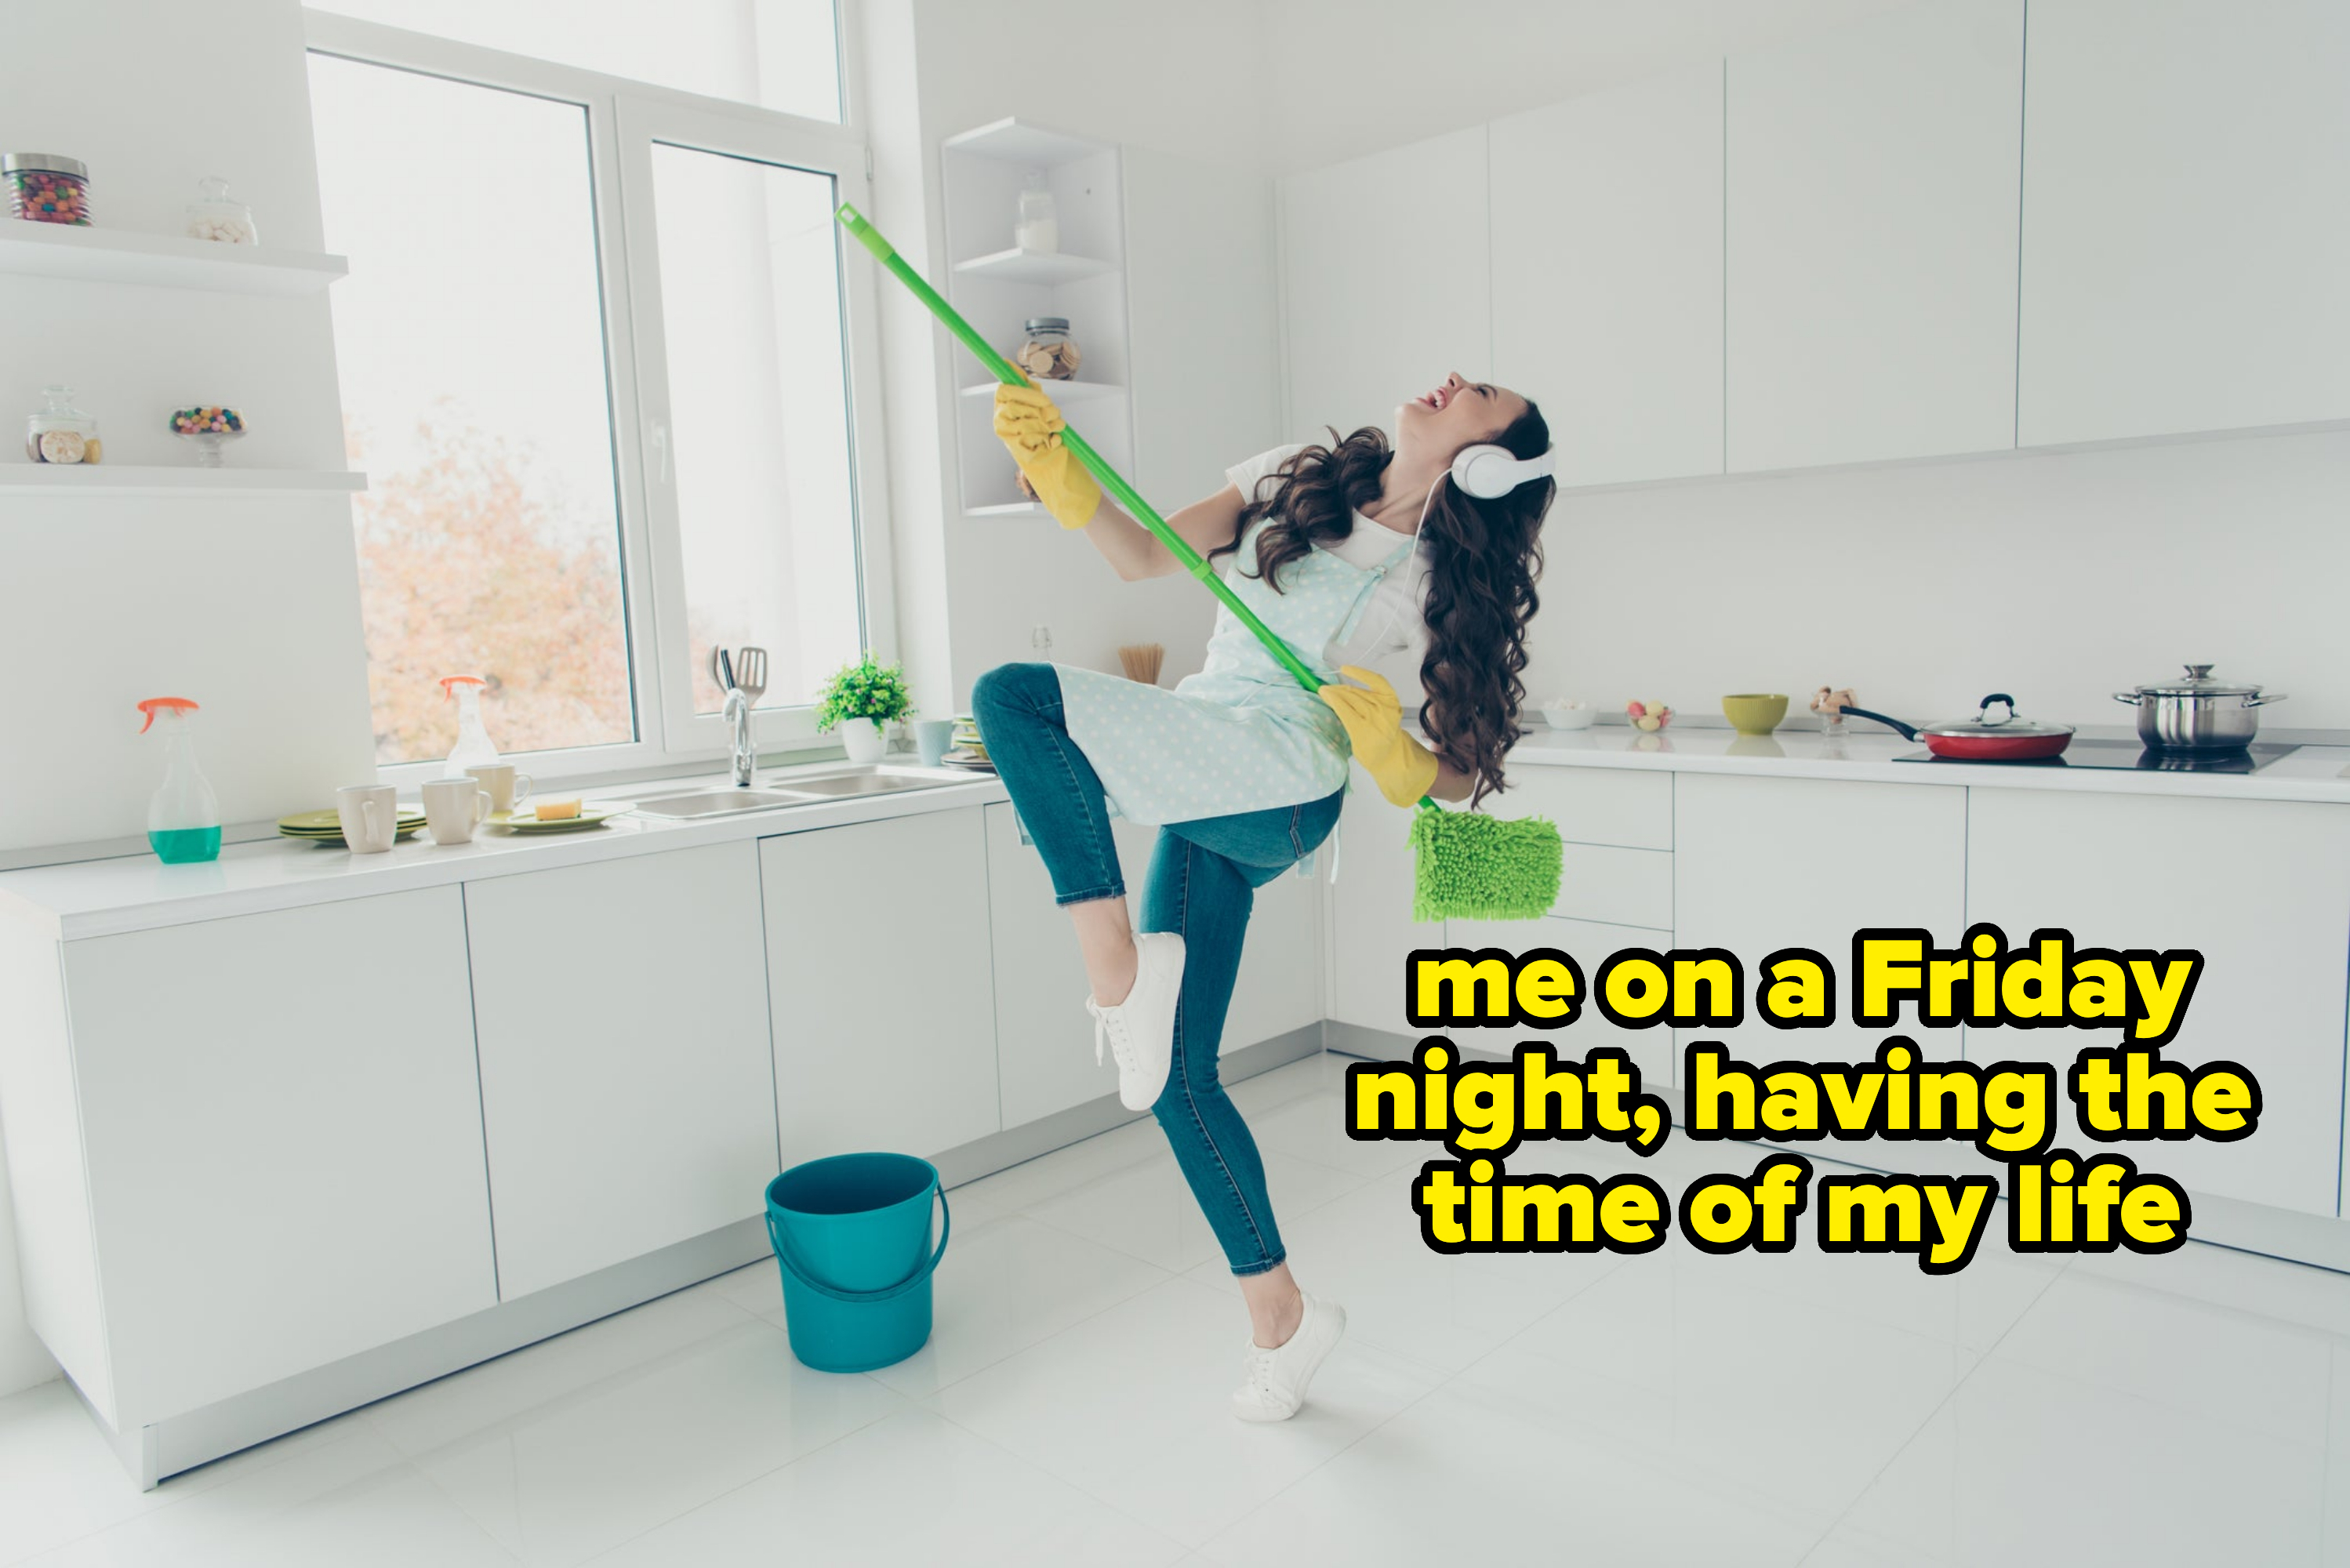 Woman pretending to play guitar with a mop while cleaning the kitchen